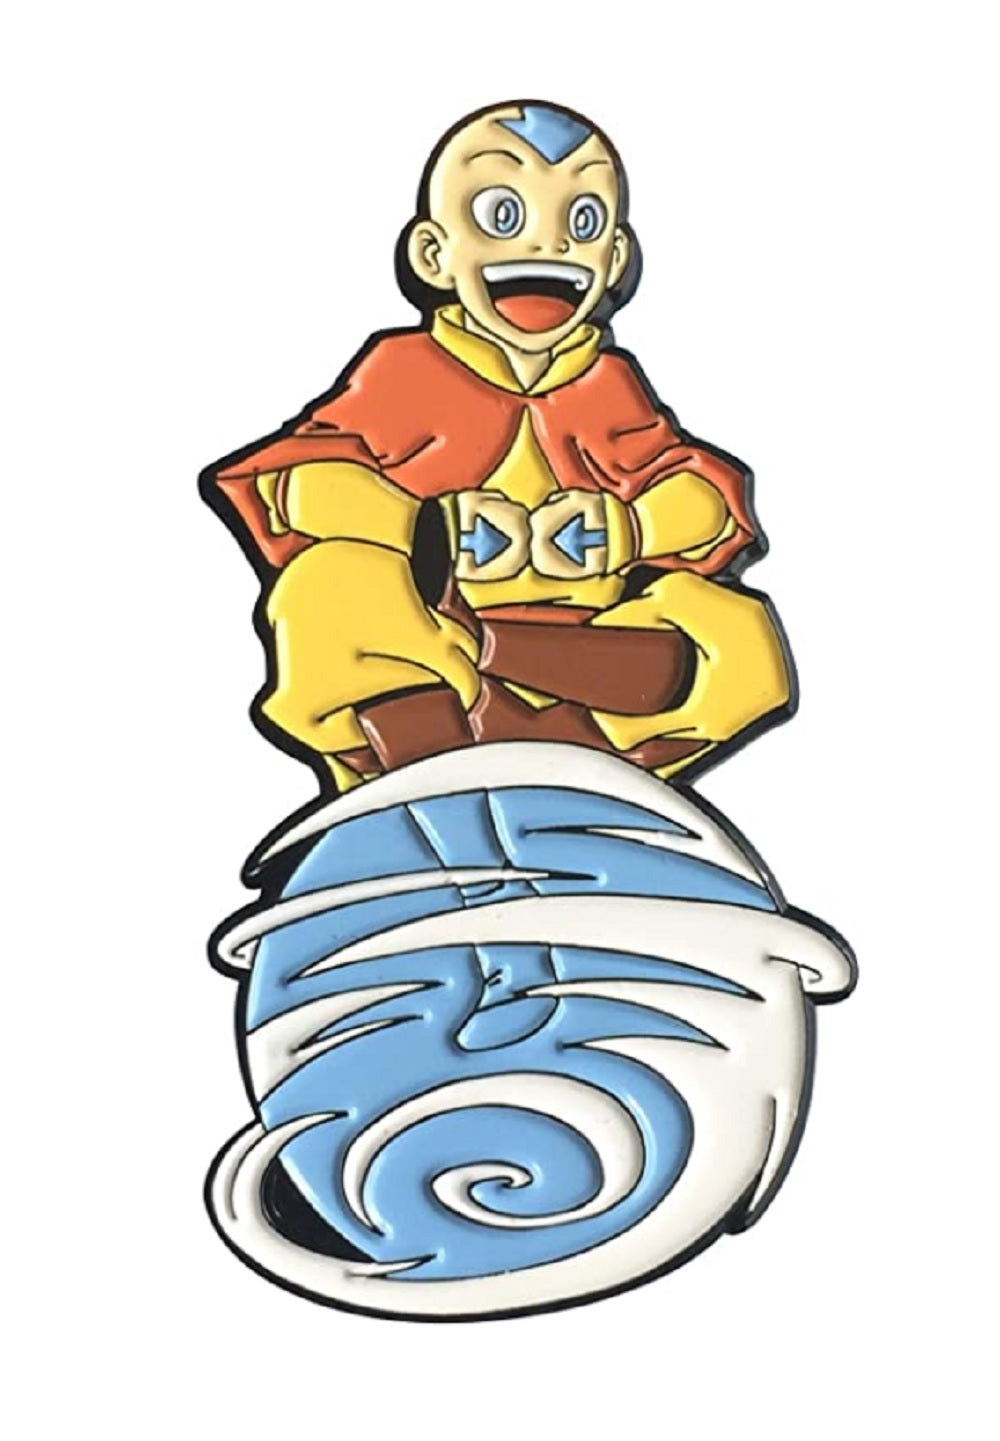 Avatar The Last Airbender Aang On Air Scooter Collectible Pin